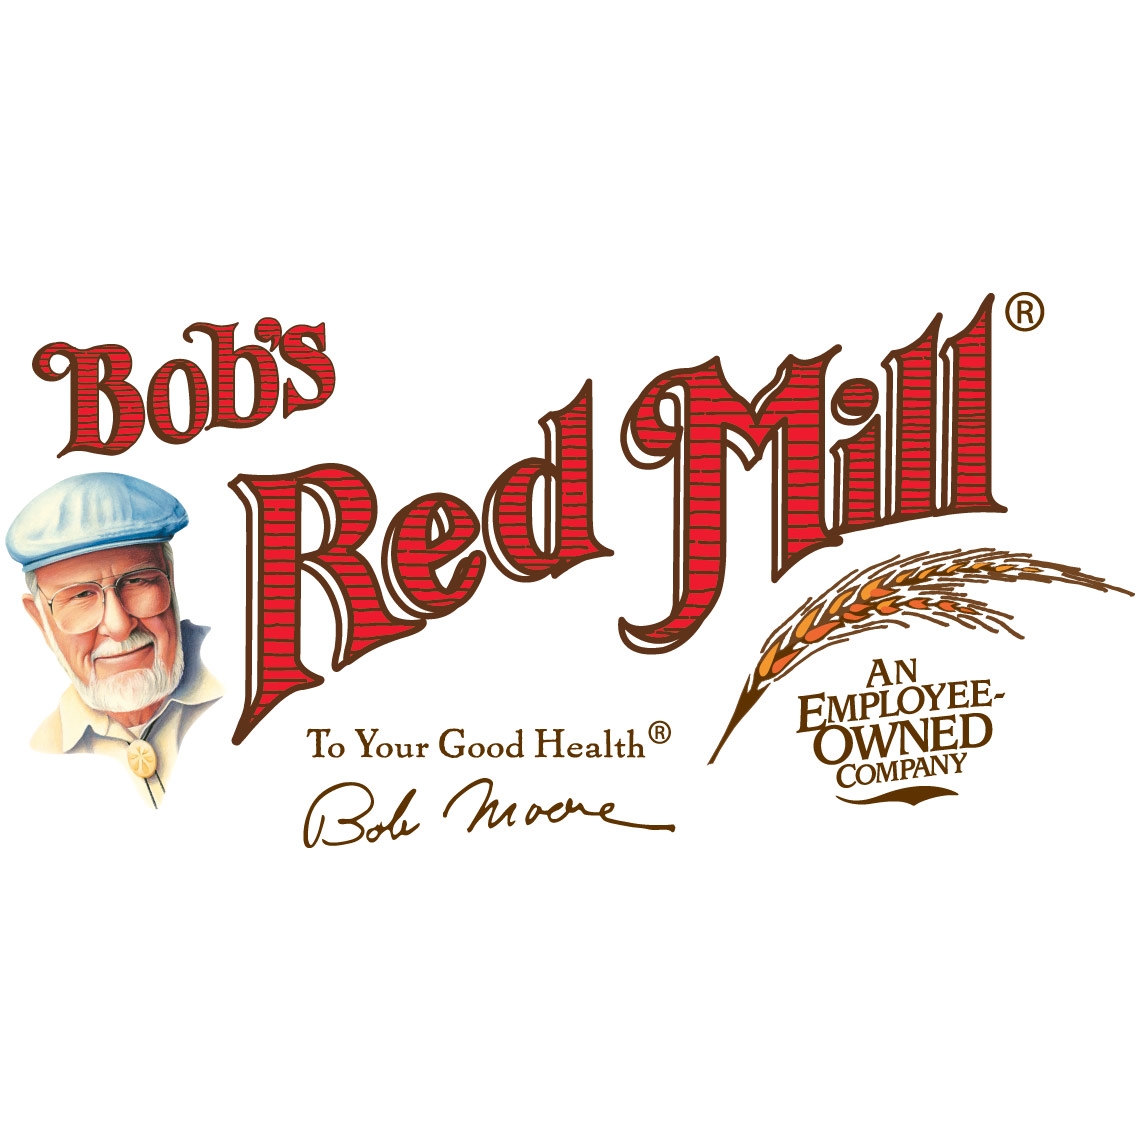 Whole Wheat Flour Bob S Red Mill Natural Foods,What Does Vegan Mean In Food